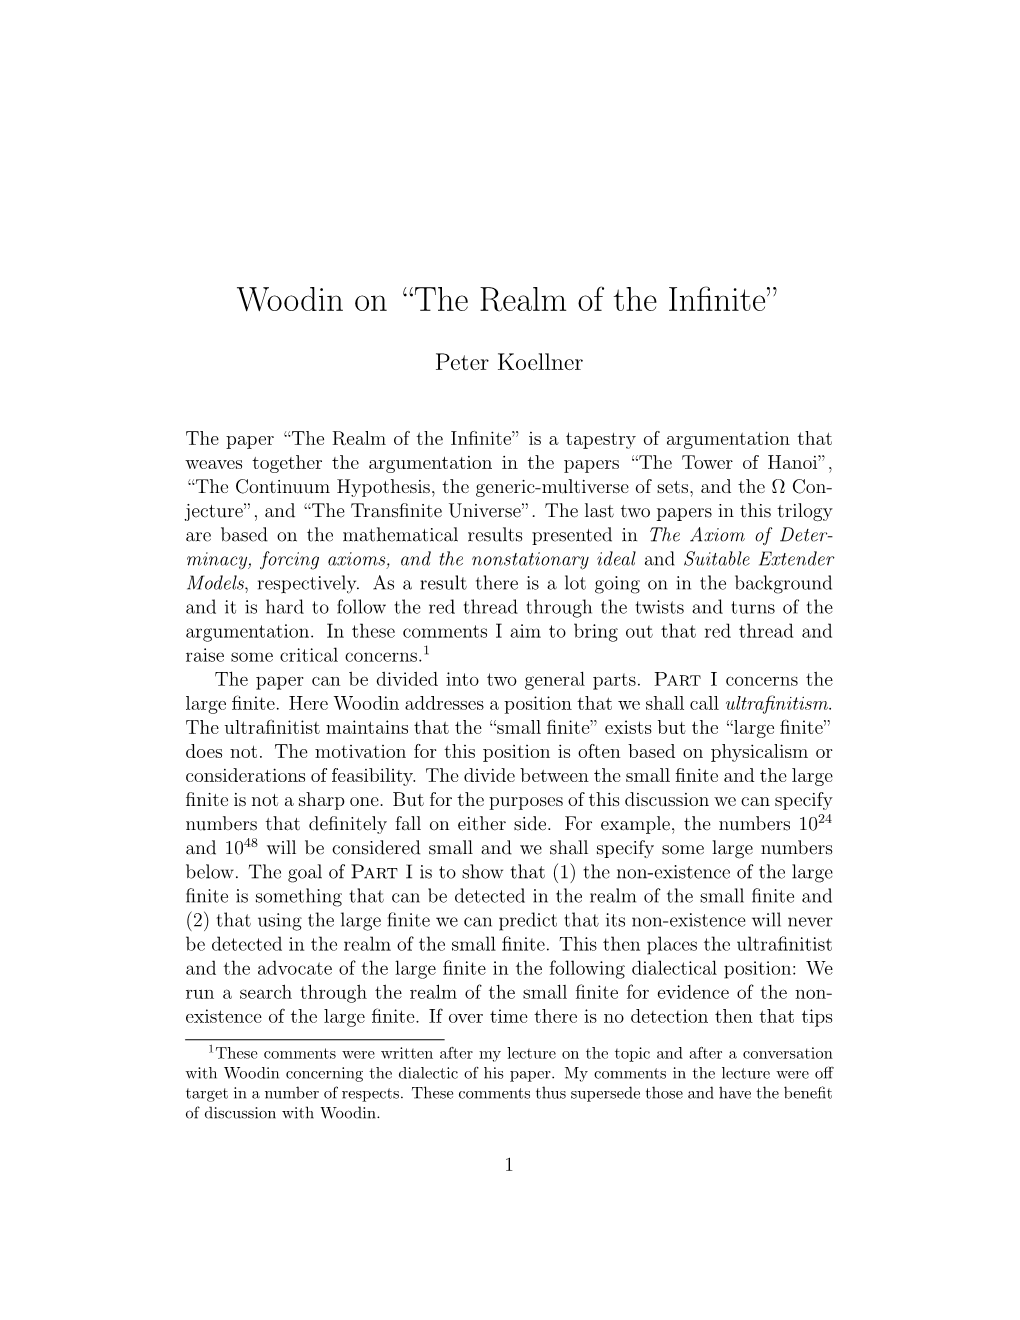 Woodin on “The Realm of the Infinite”